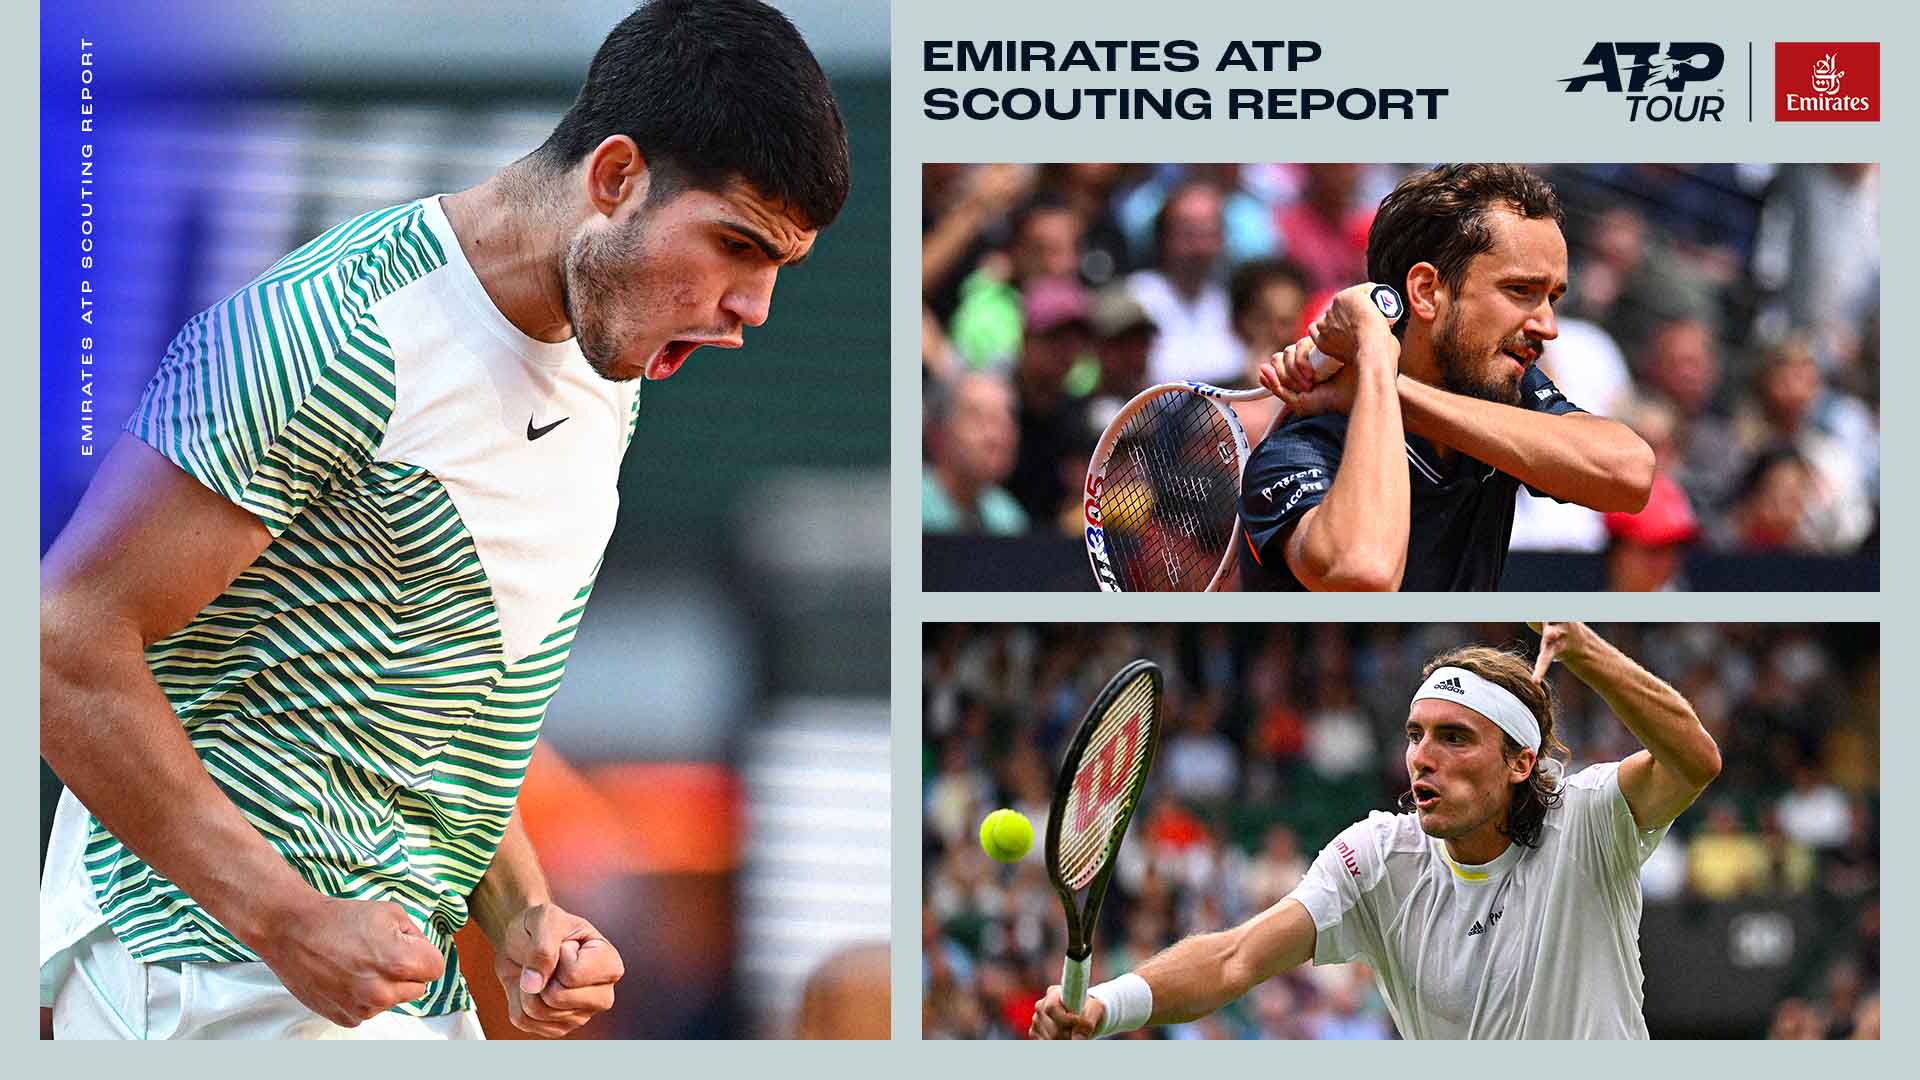 Live Tennis Rankings, Pepperstone ATP Live Rankings (Singles), ATP Tour, Tennis, ATP Tour